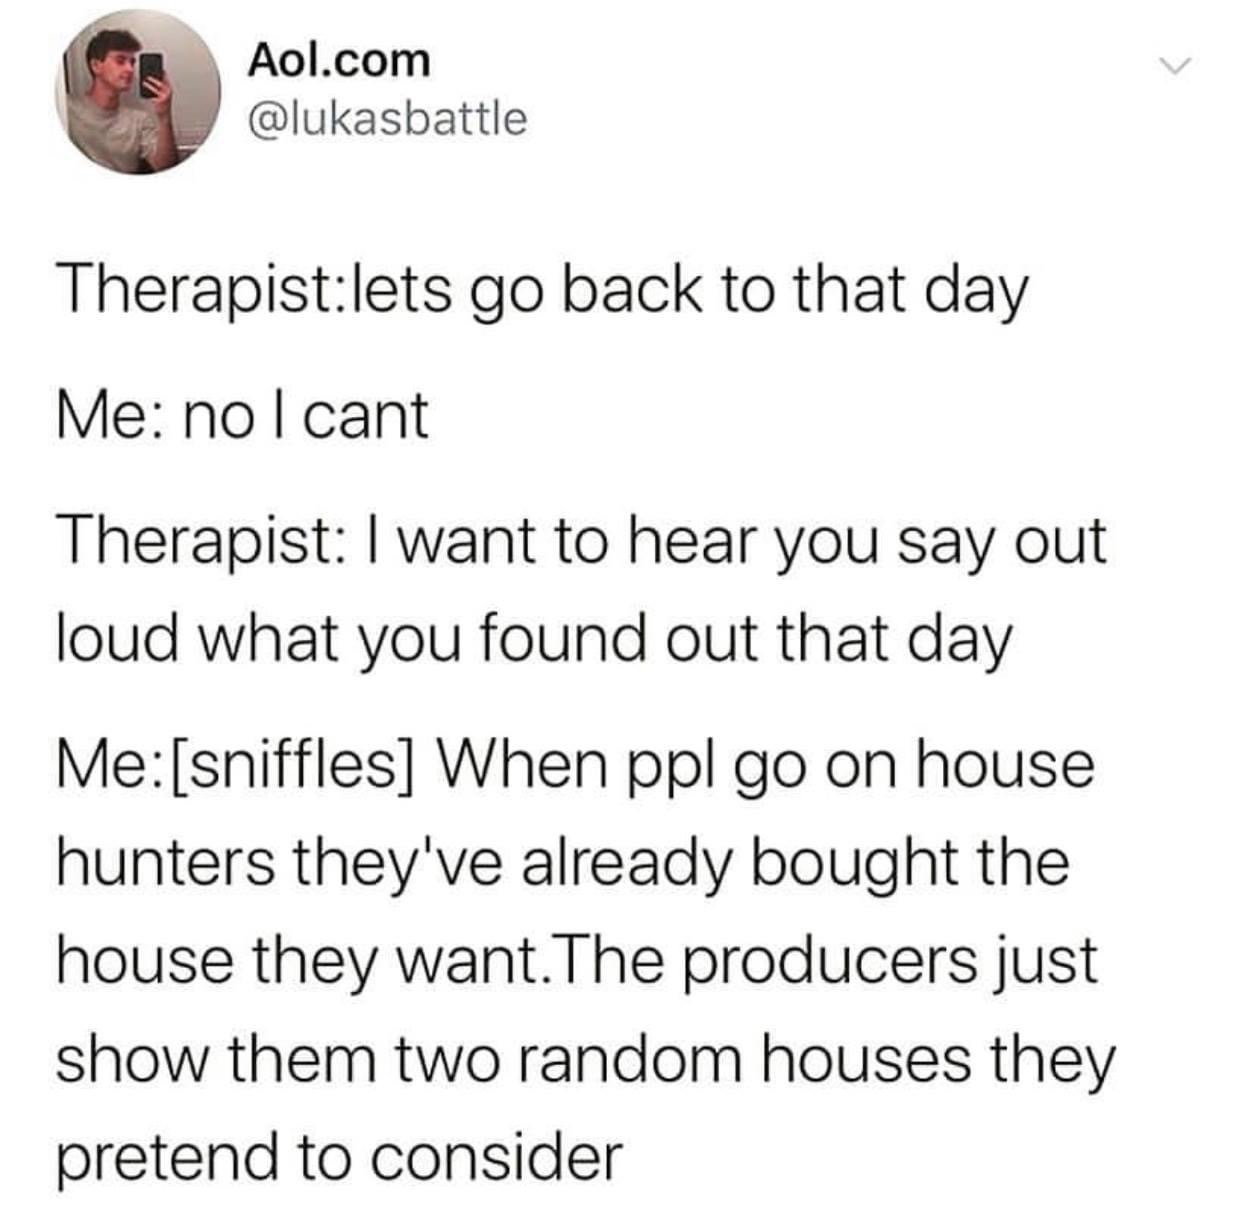 funny memes and tweets - angle - Aol.com Therapistlets go back to that day Me no I cant Therapist I want to hear you say out loud what you found out that day Mesniffles When ppl go on house hunters they've already bought the house they want. The producers